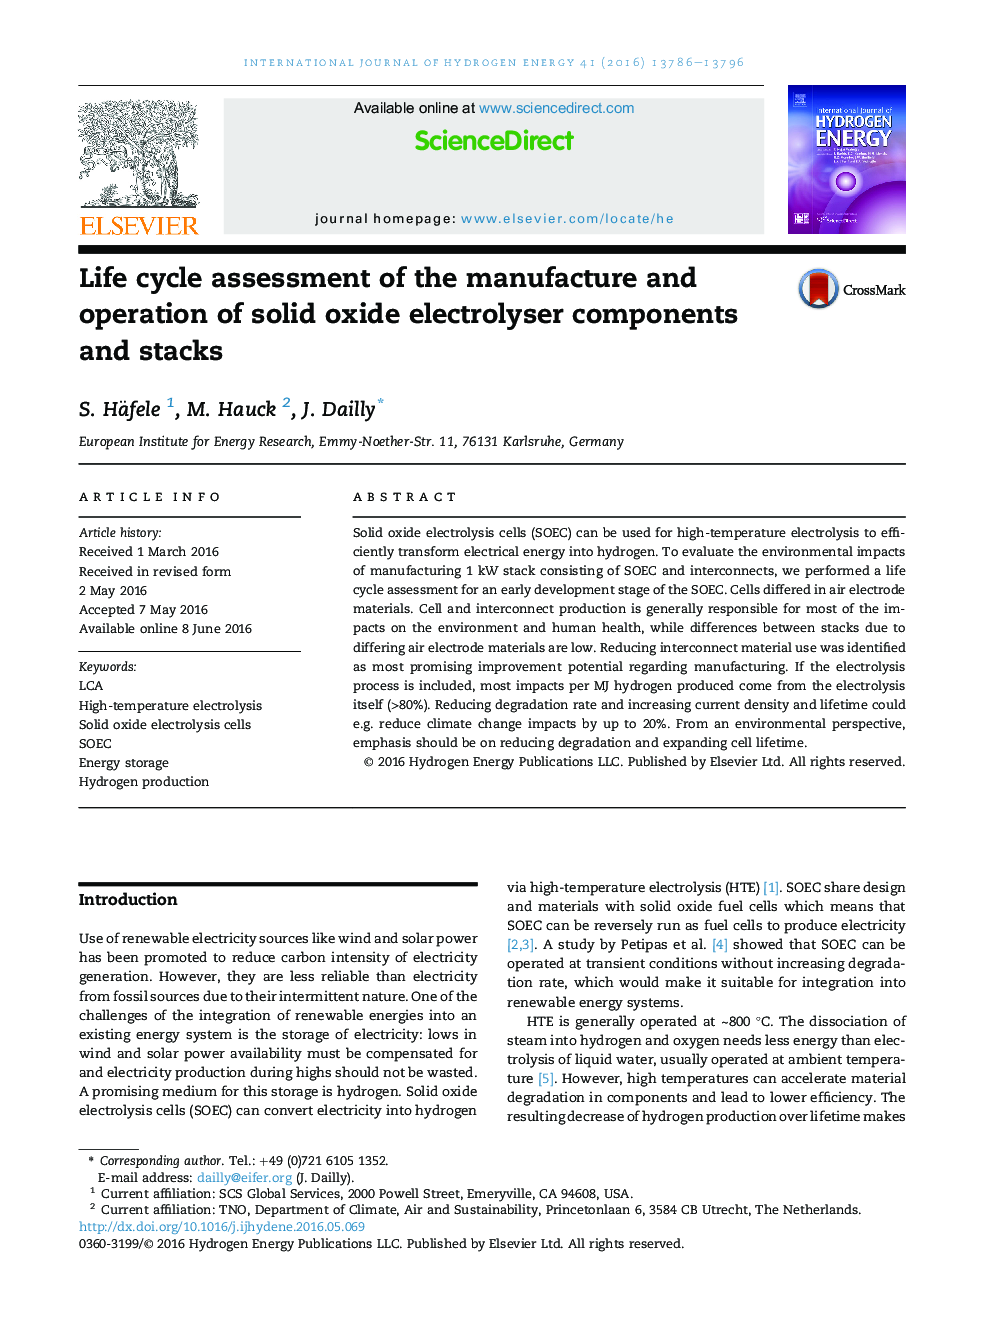 Life cycle assessment of the manufacture and operation of solid oxide electrolyser components and stacks